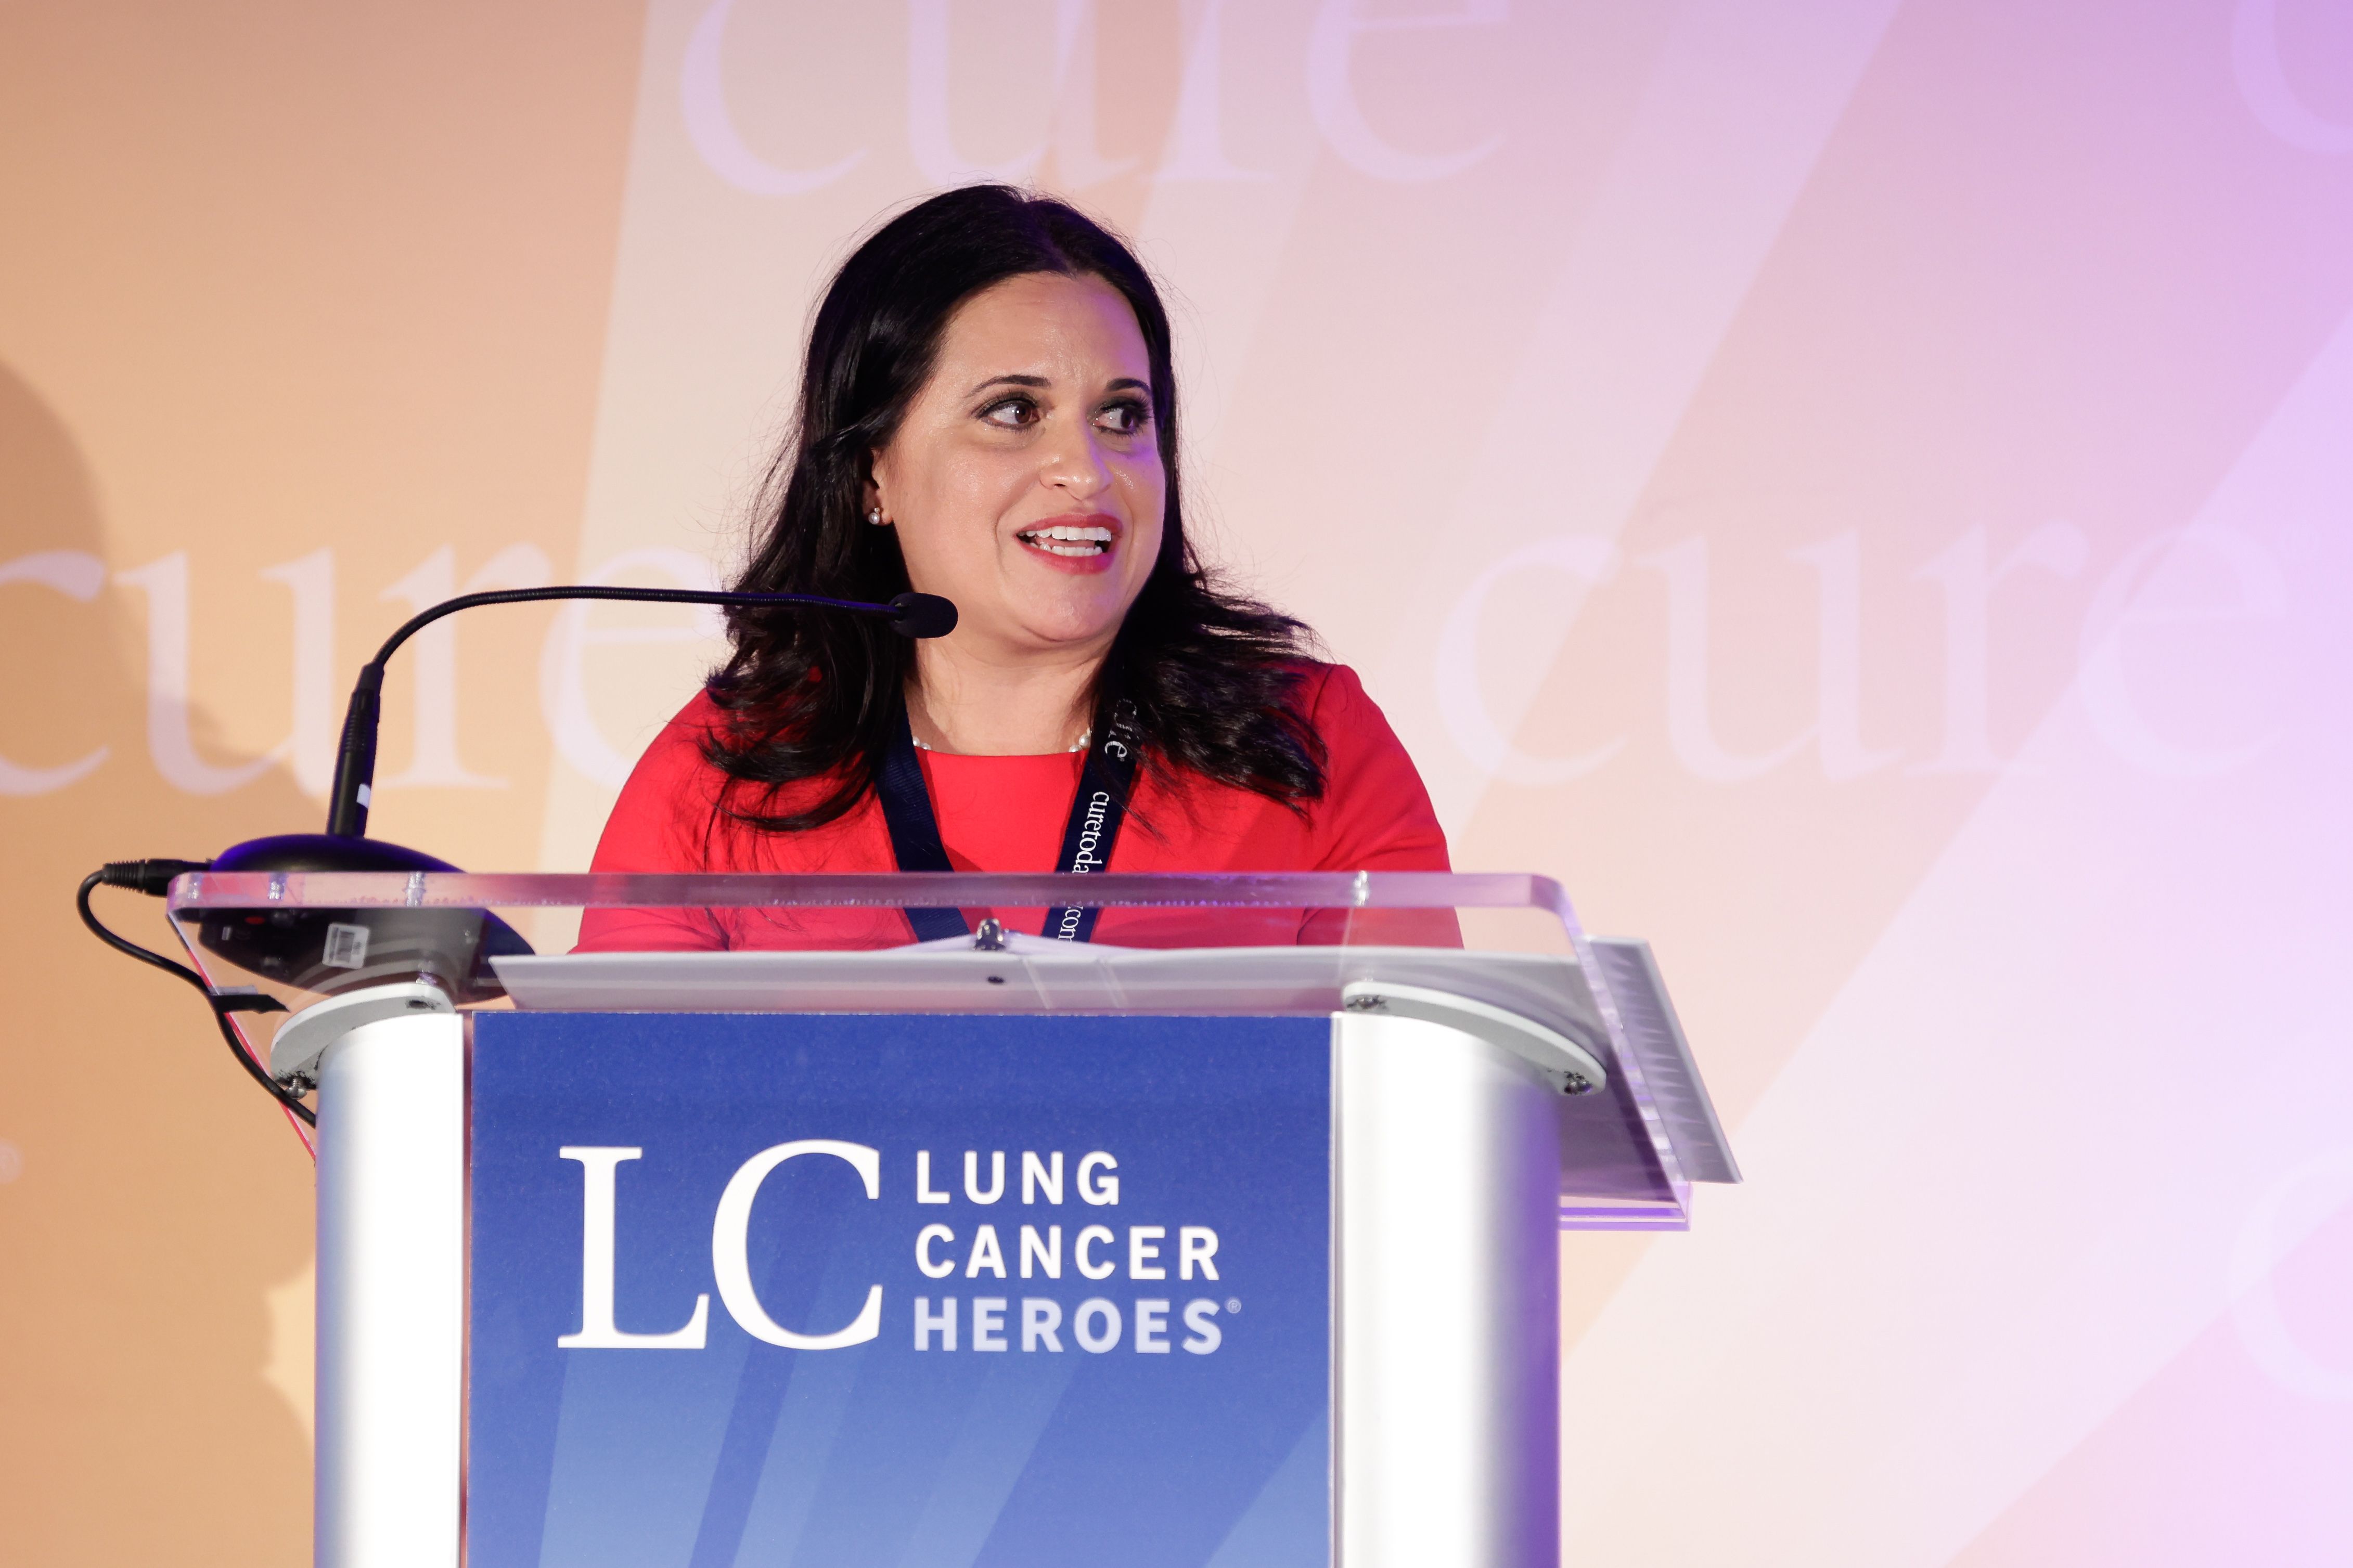 A Lung Cancer Hero Is the Doctor 'Every Oncologist Should Strive to Be'